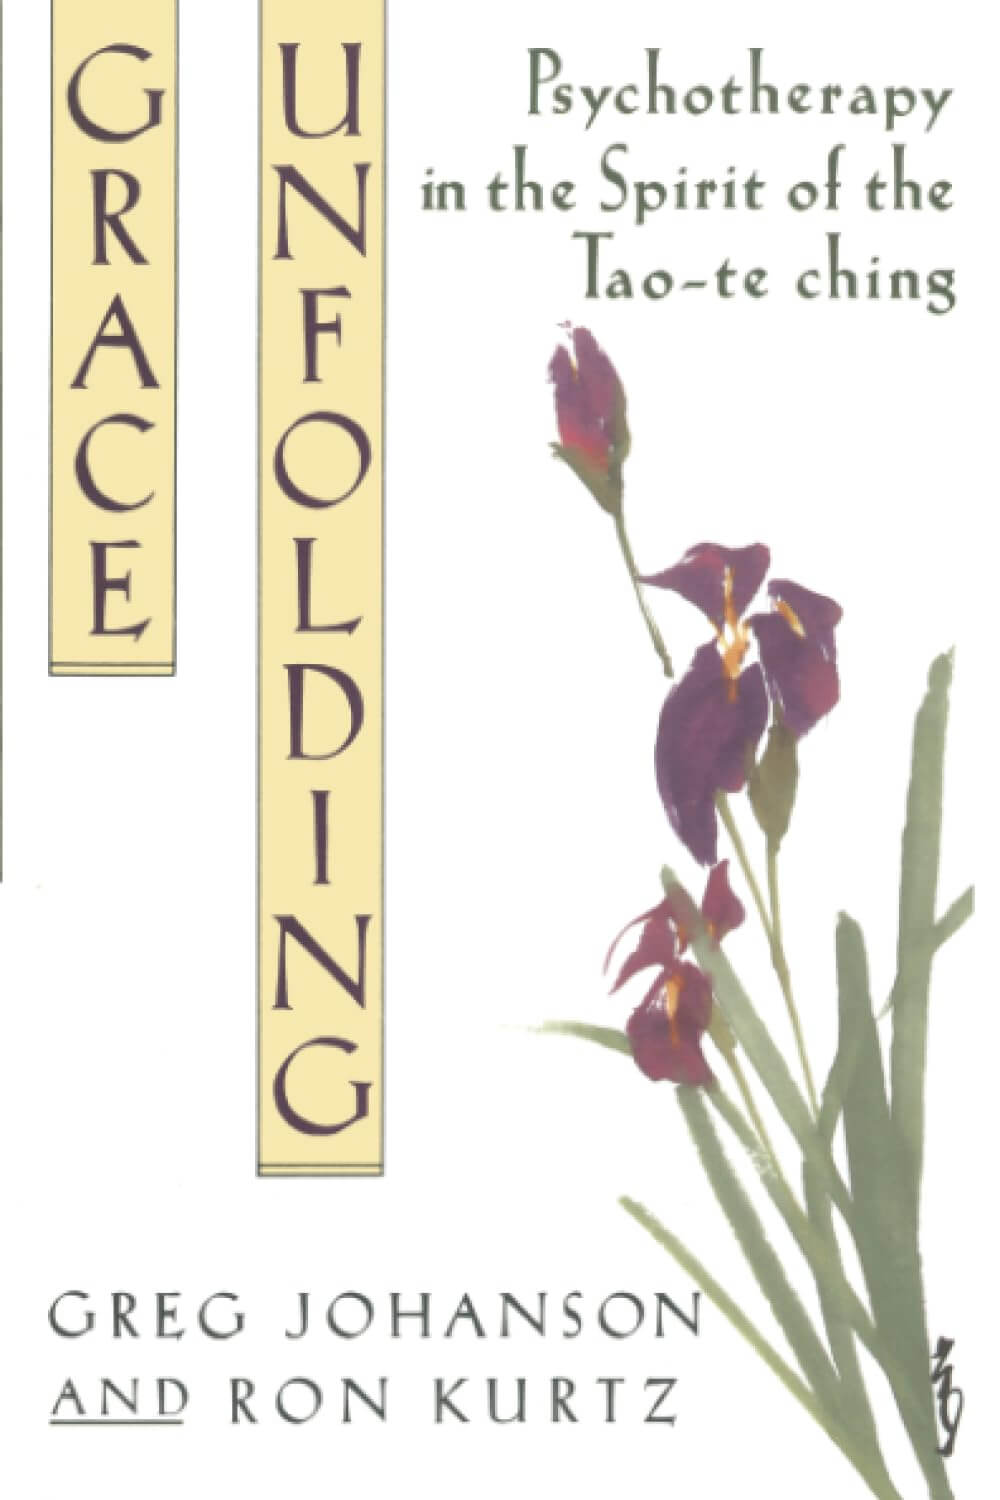 book cover: Grace Unfolding: Psychotherapy in the Spirit of Tao-te ching